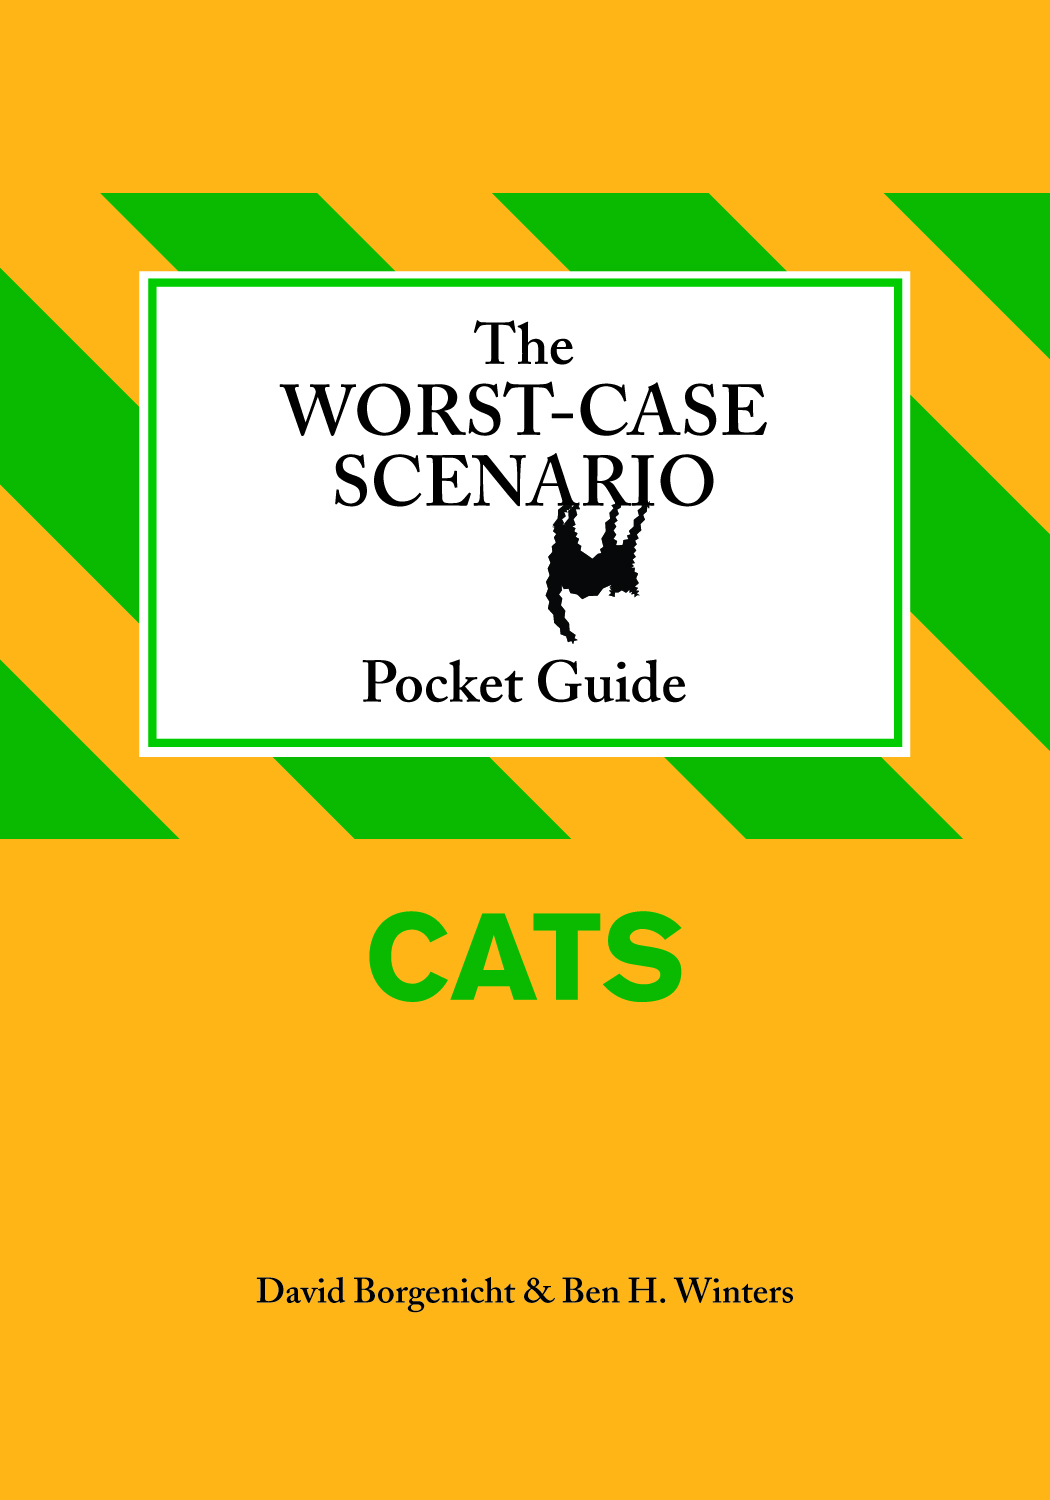 wcspg_cats_cover.jpg